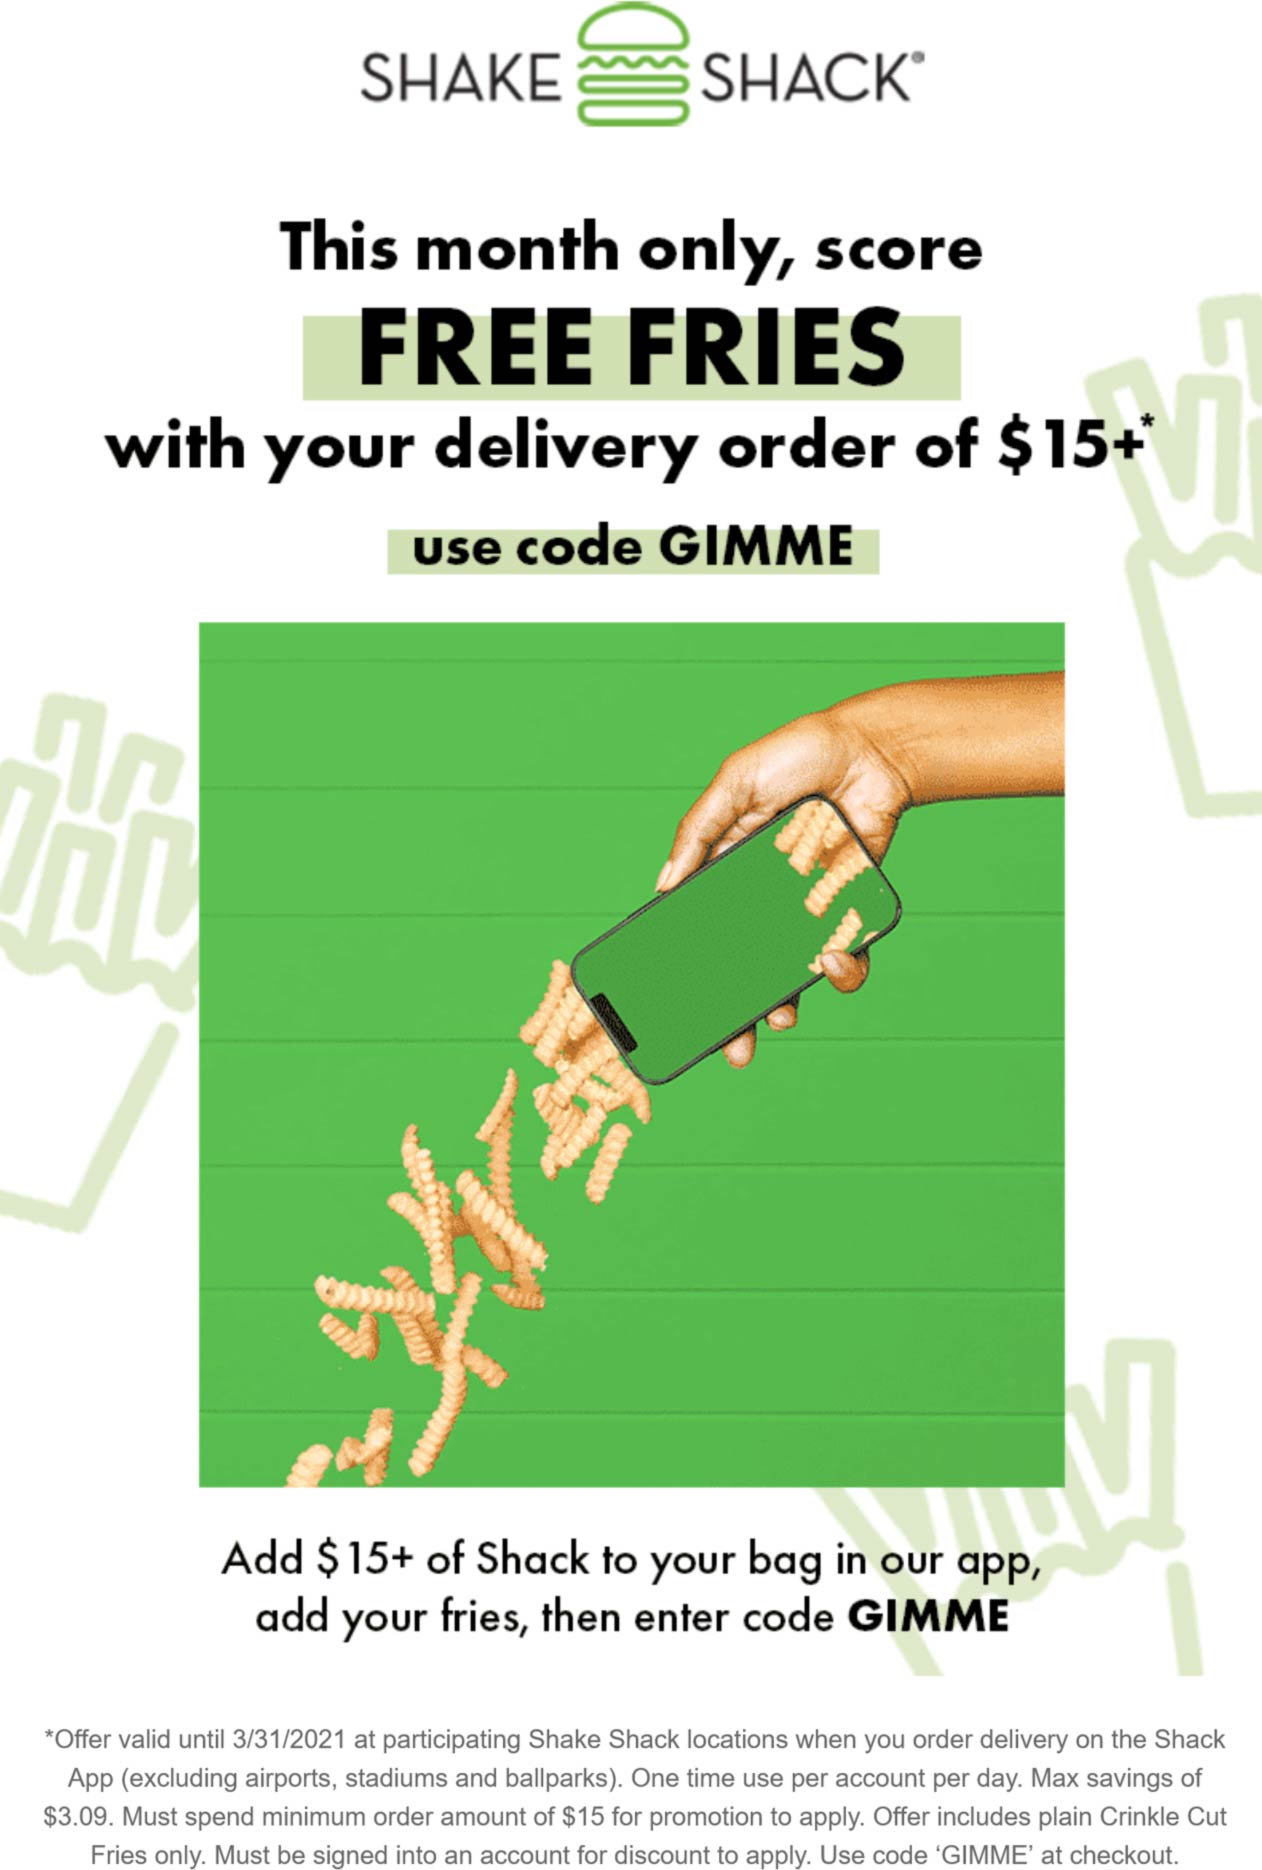 Shake Shack restaurants Coupon  Free fries with your delivery at Shake Shack via promo code GIMME #shakeshack 